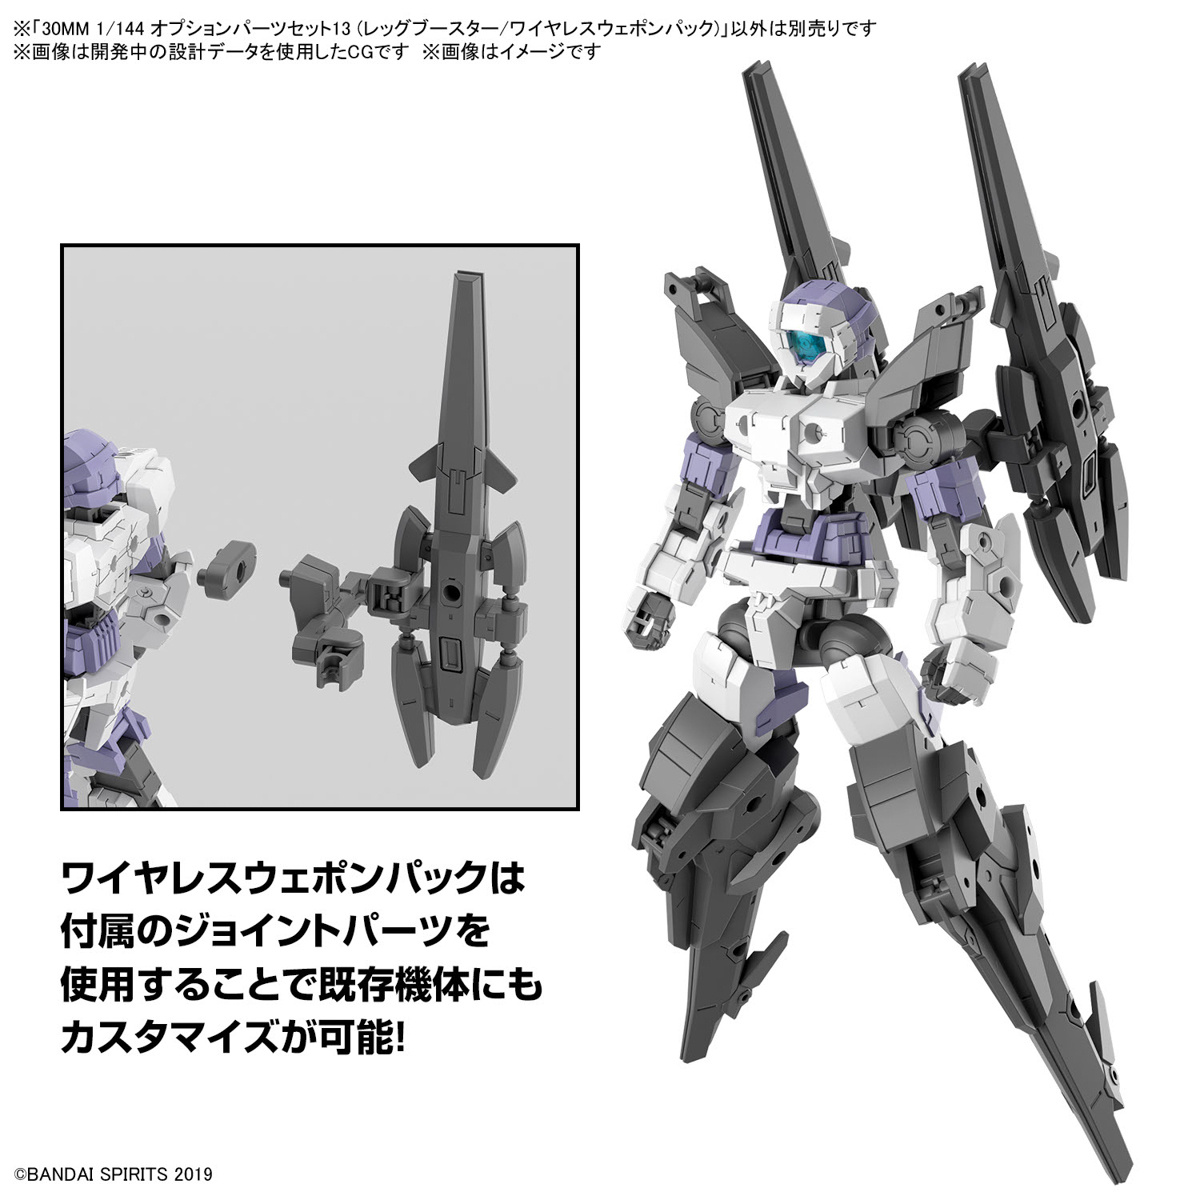 KIT ACCESORIOS 30MM 1/144 OPTION PARTS SET 13 LEG BOOSTER UNIT / WIRELESS WEAPON PACK BANDAI HOBBY